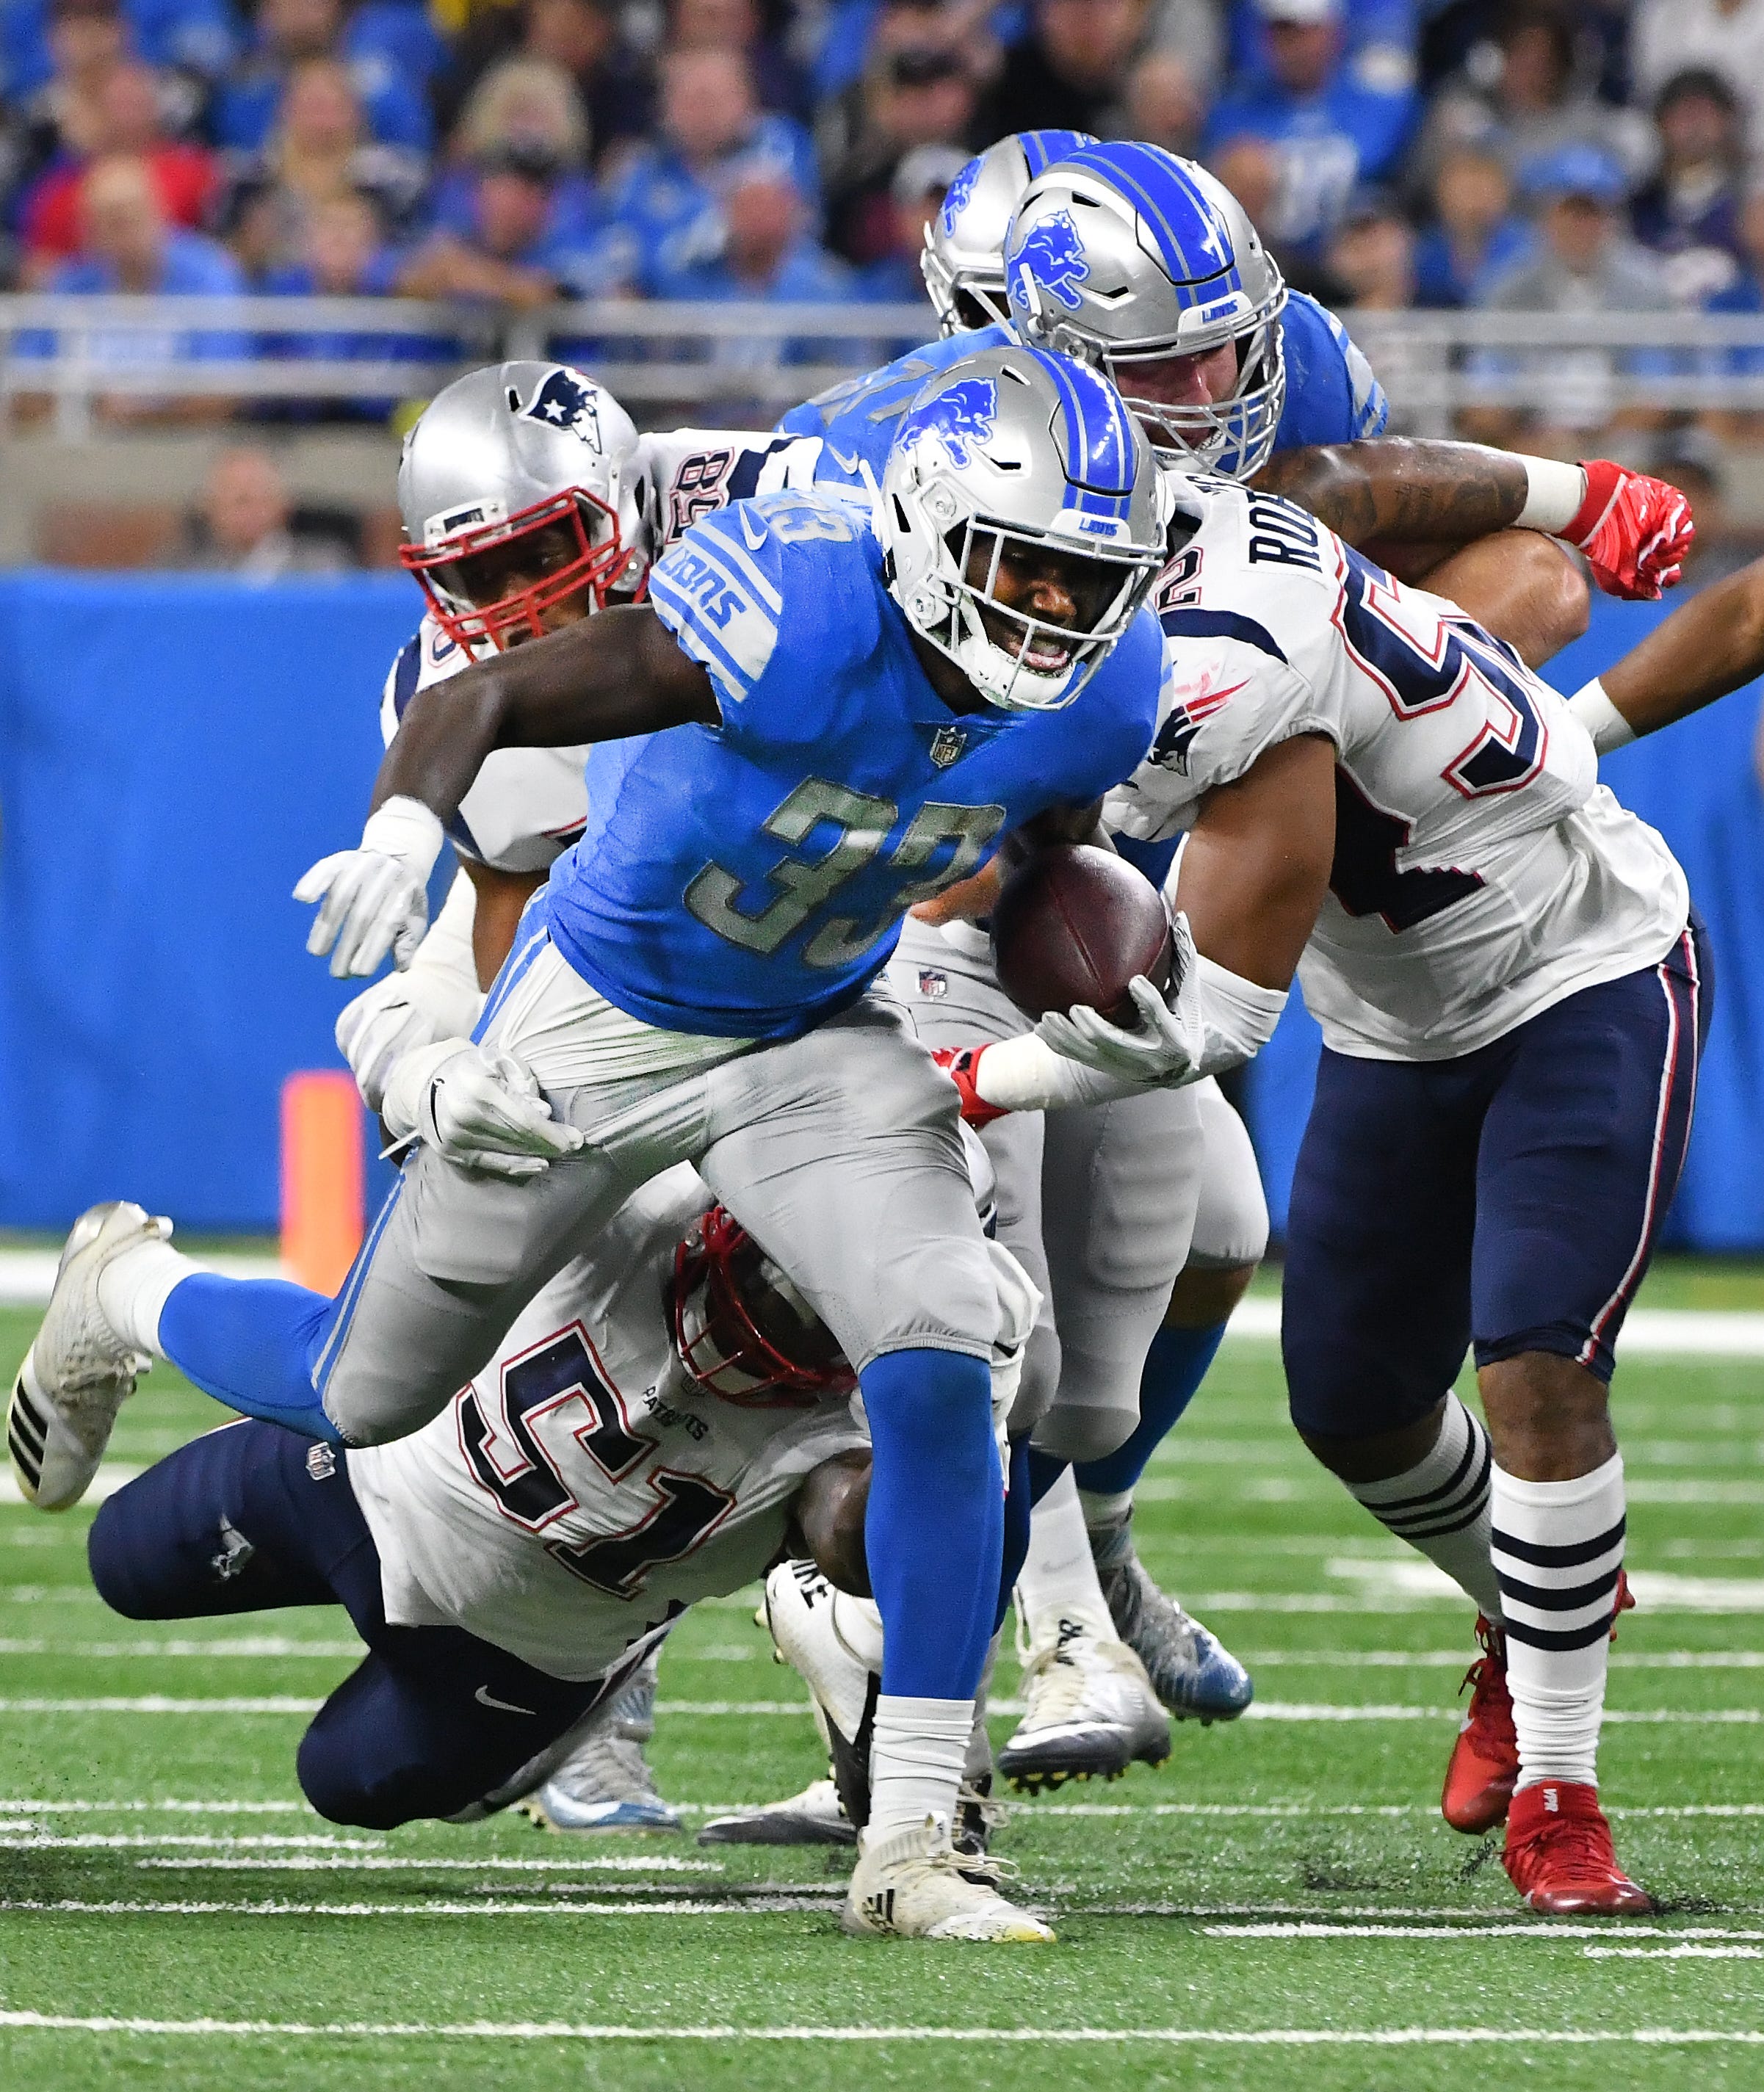 Lions running back Kerryon Johnson breaks up field for a first-down run in the first quarter.